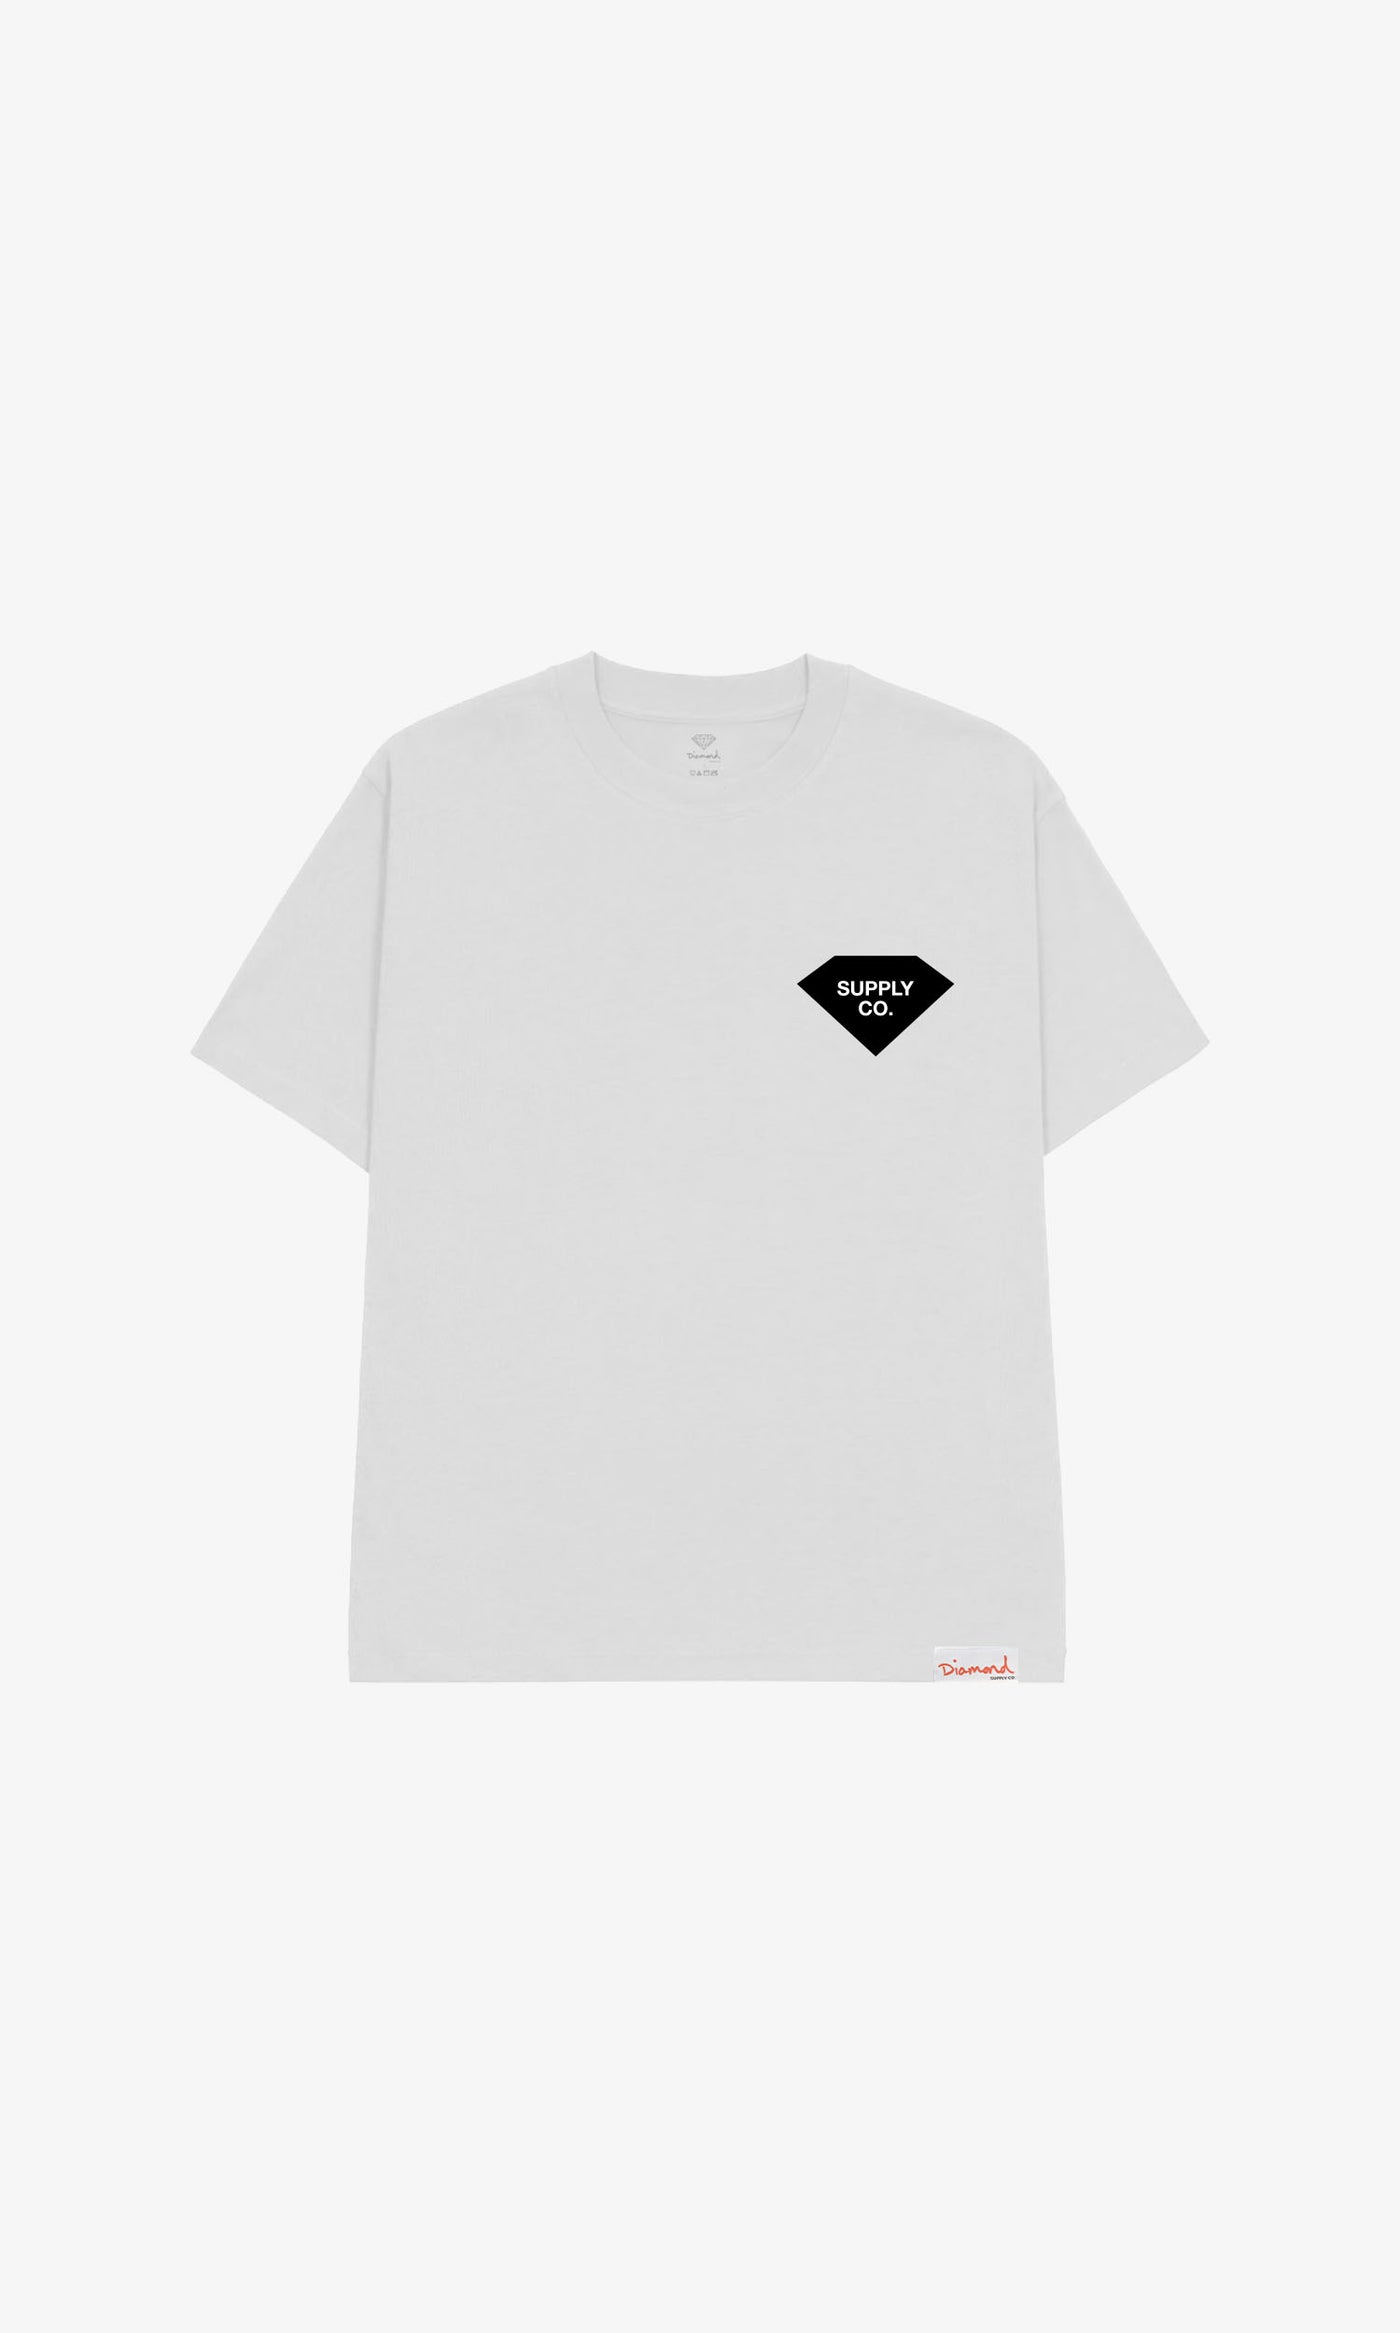 SILHOUETTE SUPPLY CO TEE - WHITE